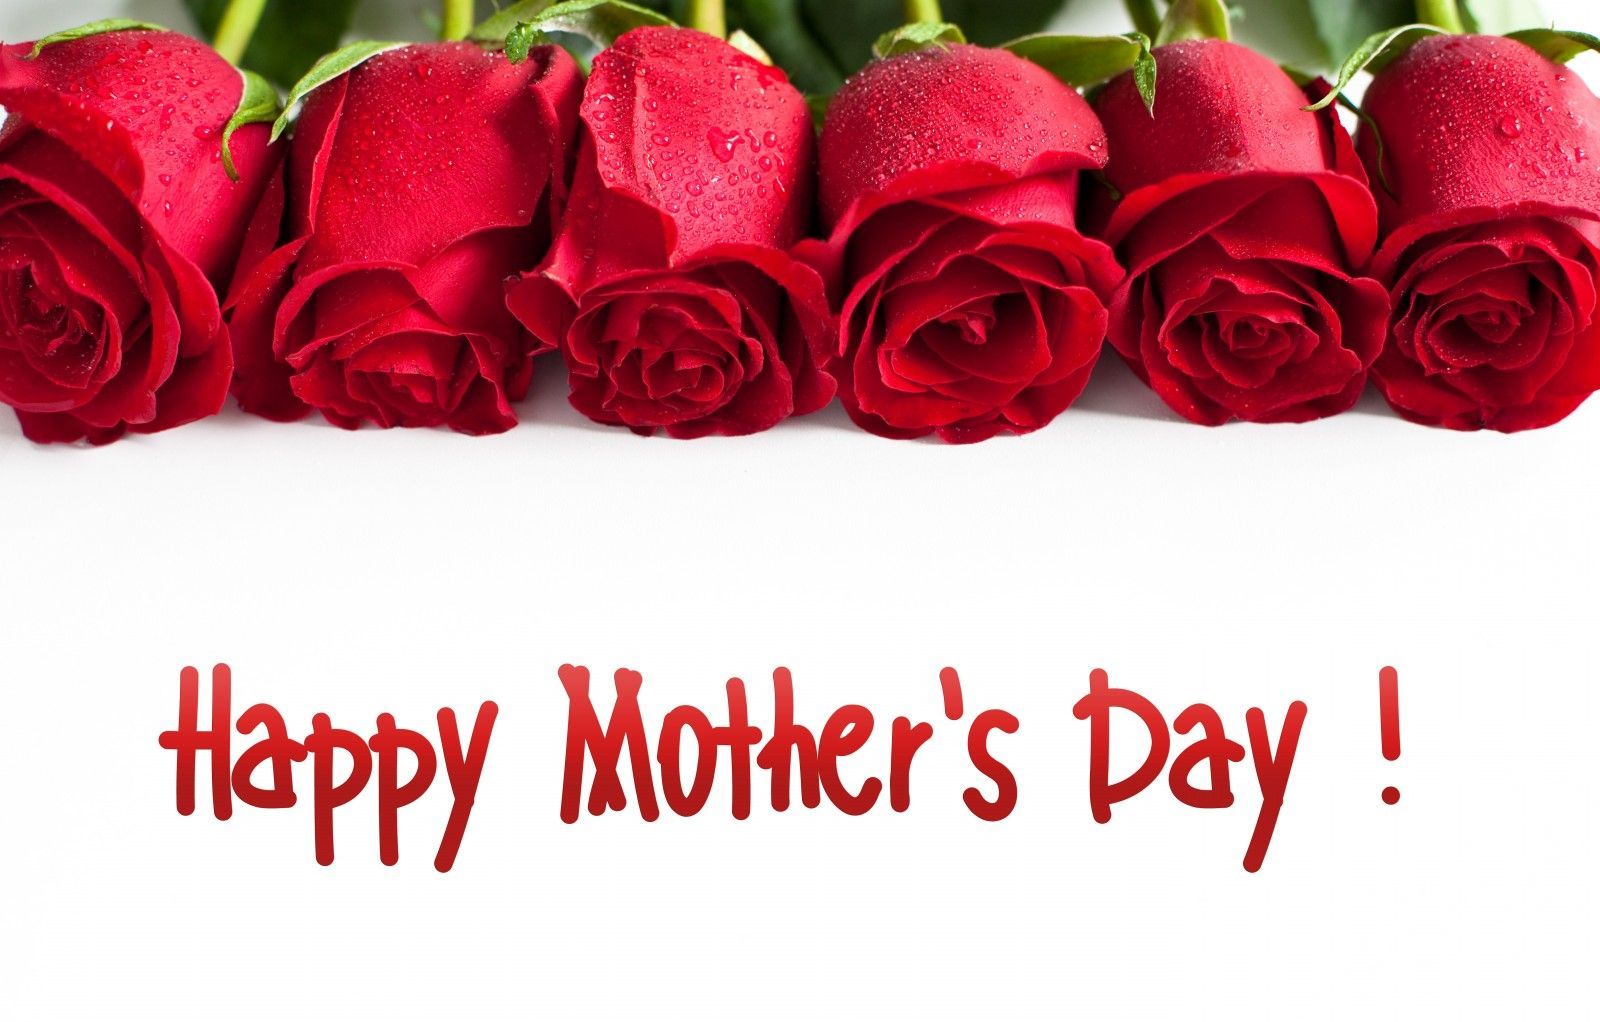 Happy Mothers Day Cards. Happy mothers .com